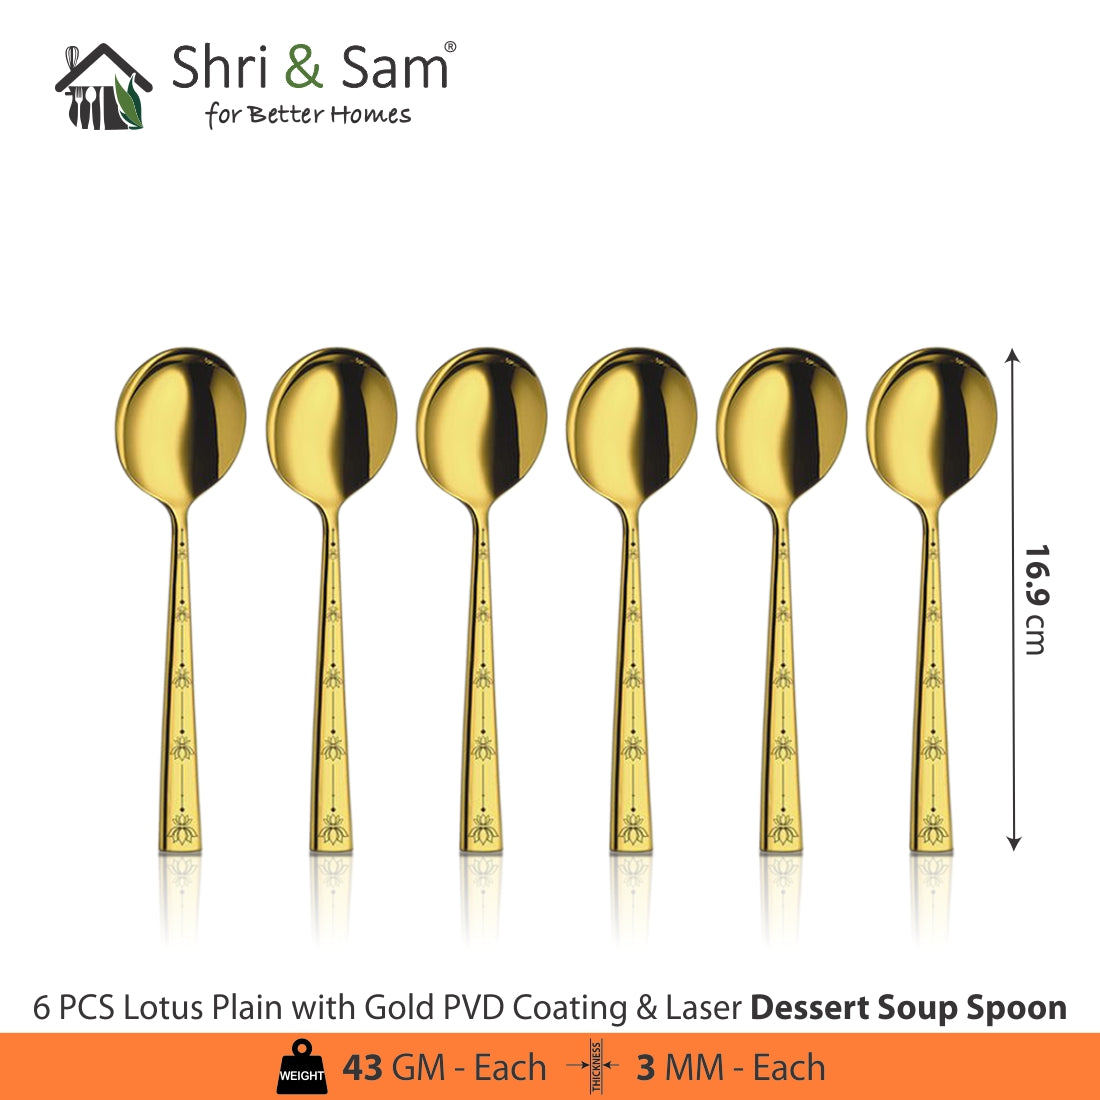 Stainless Steel Cutlery with Gold PVD Coating & Laser Lotus Plain